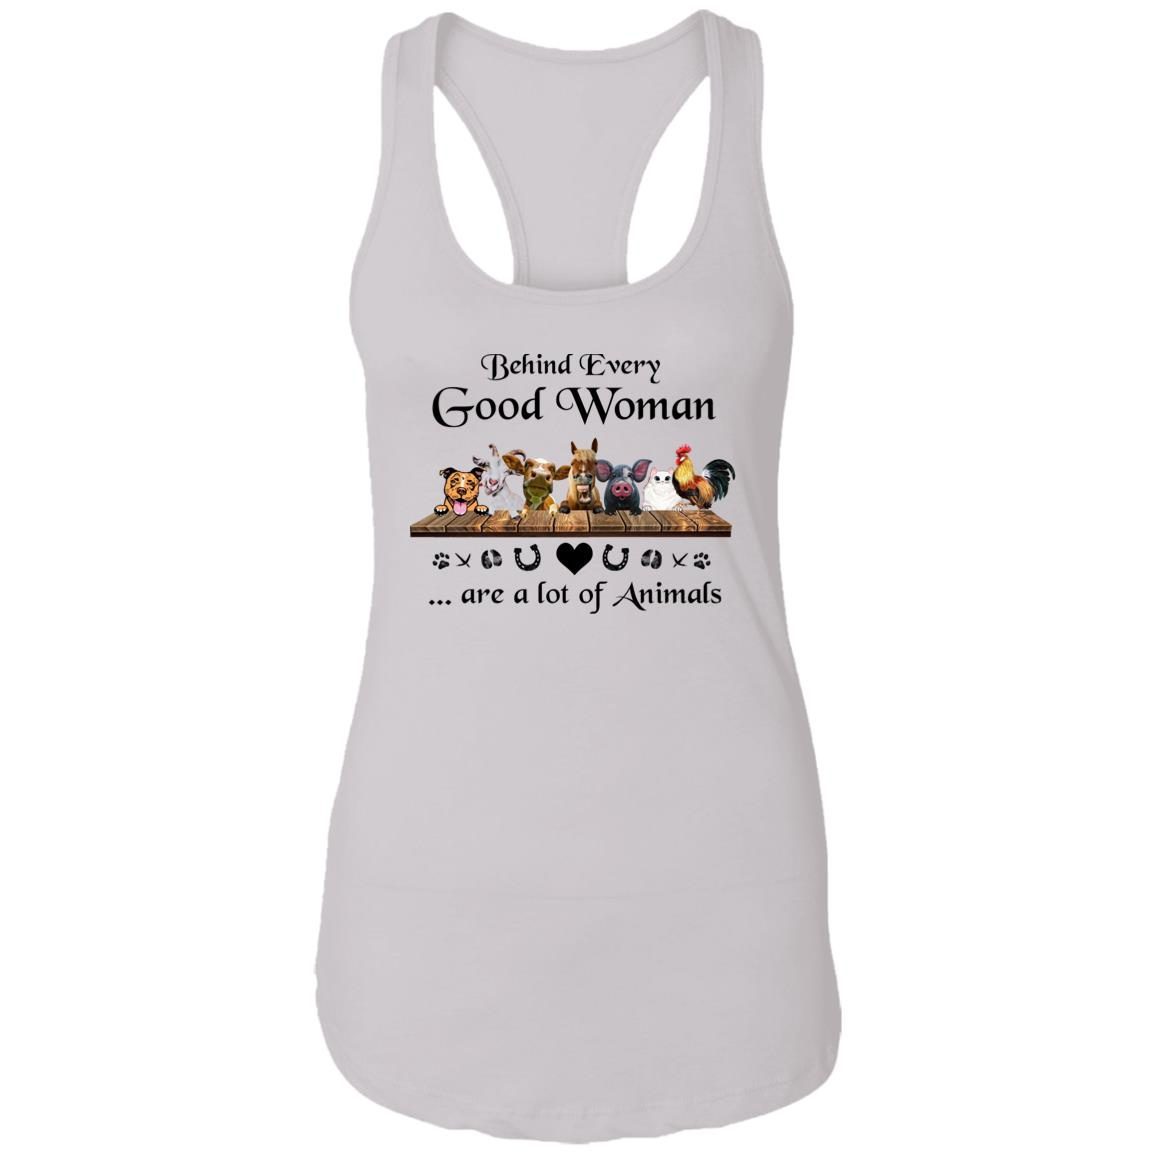 Behind Every Good Woman Are A Lot Of Animals Funny shirt